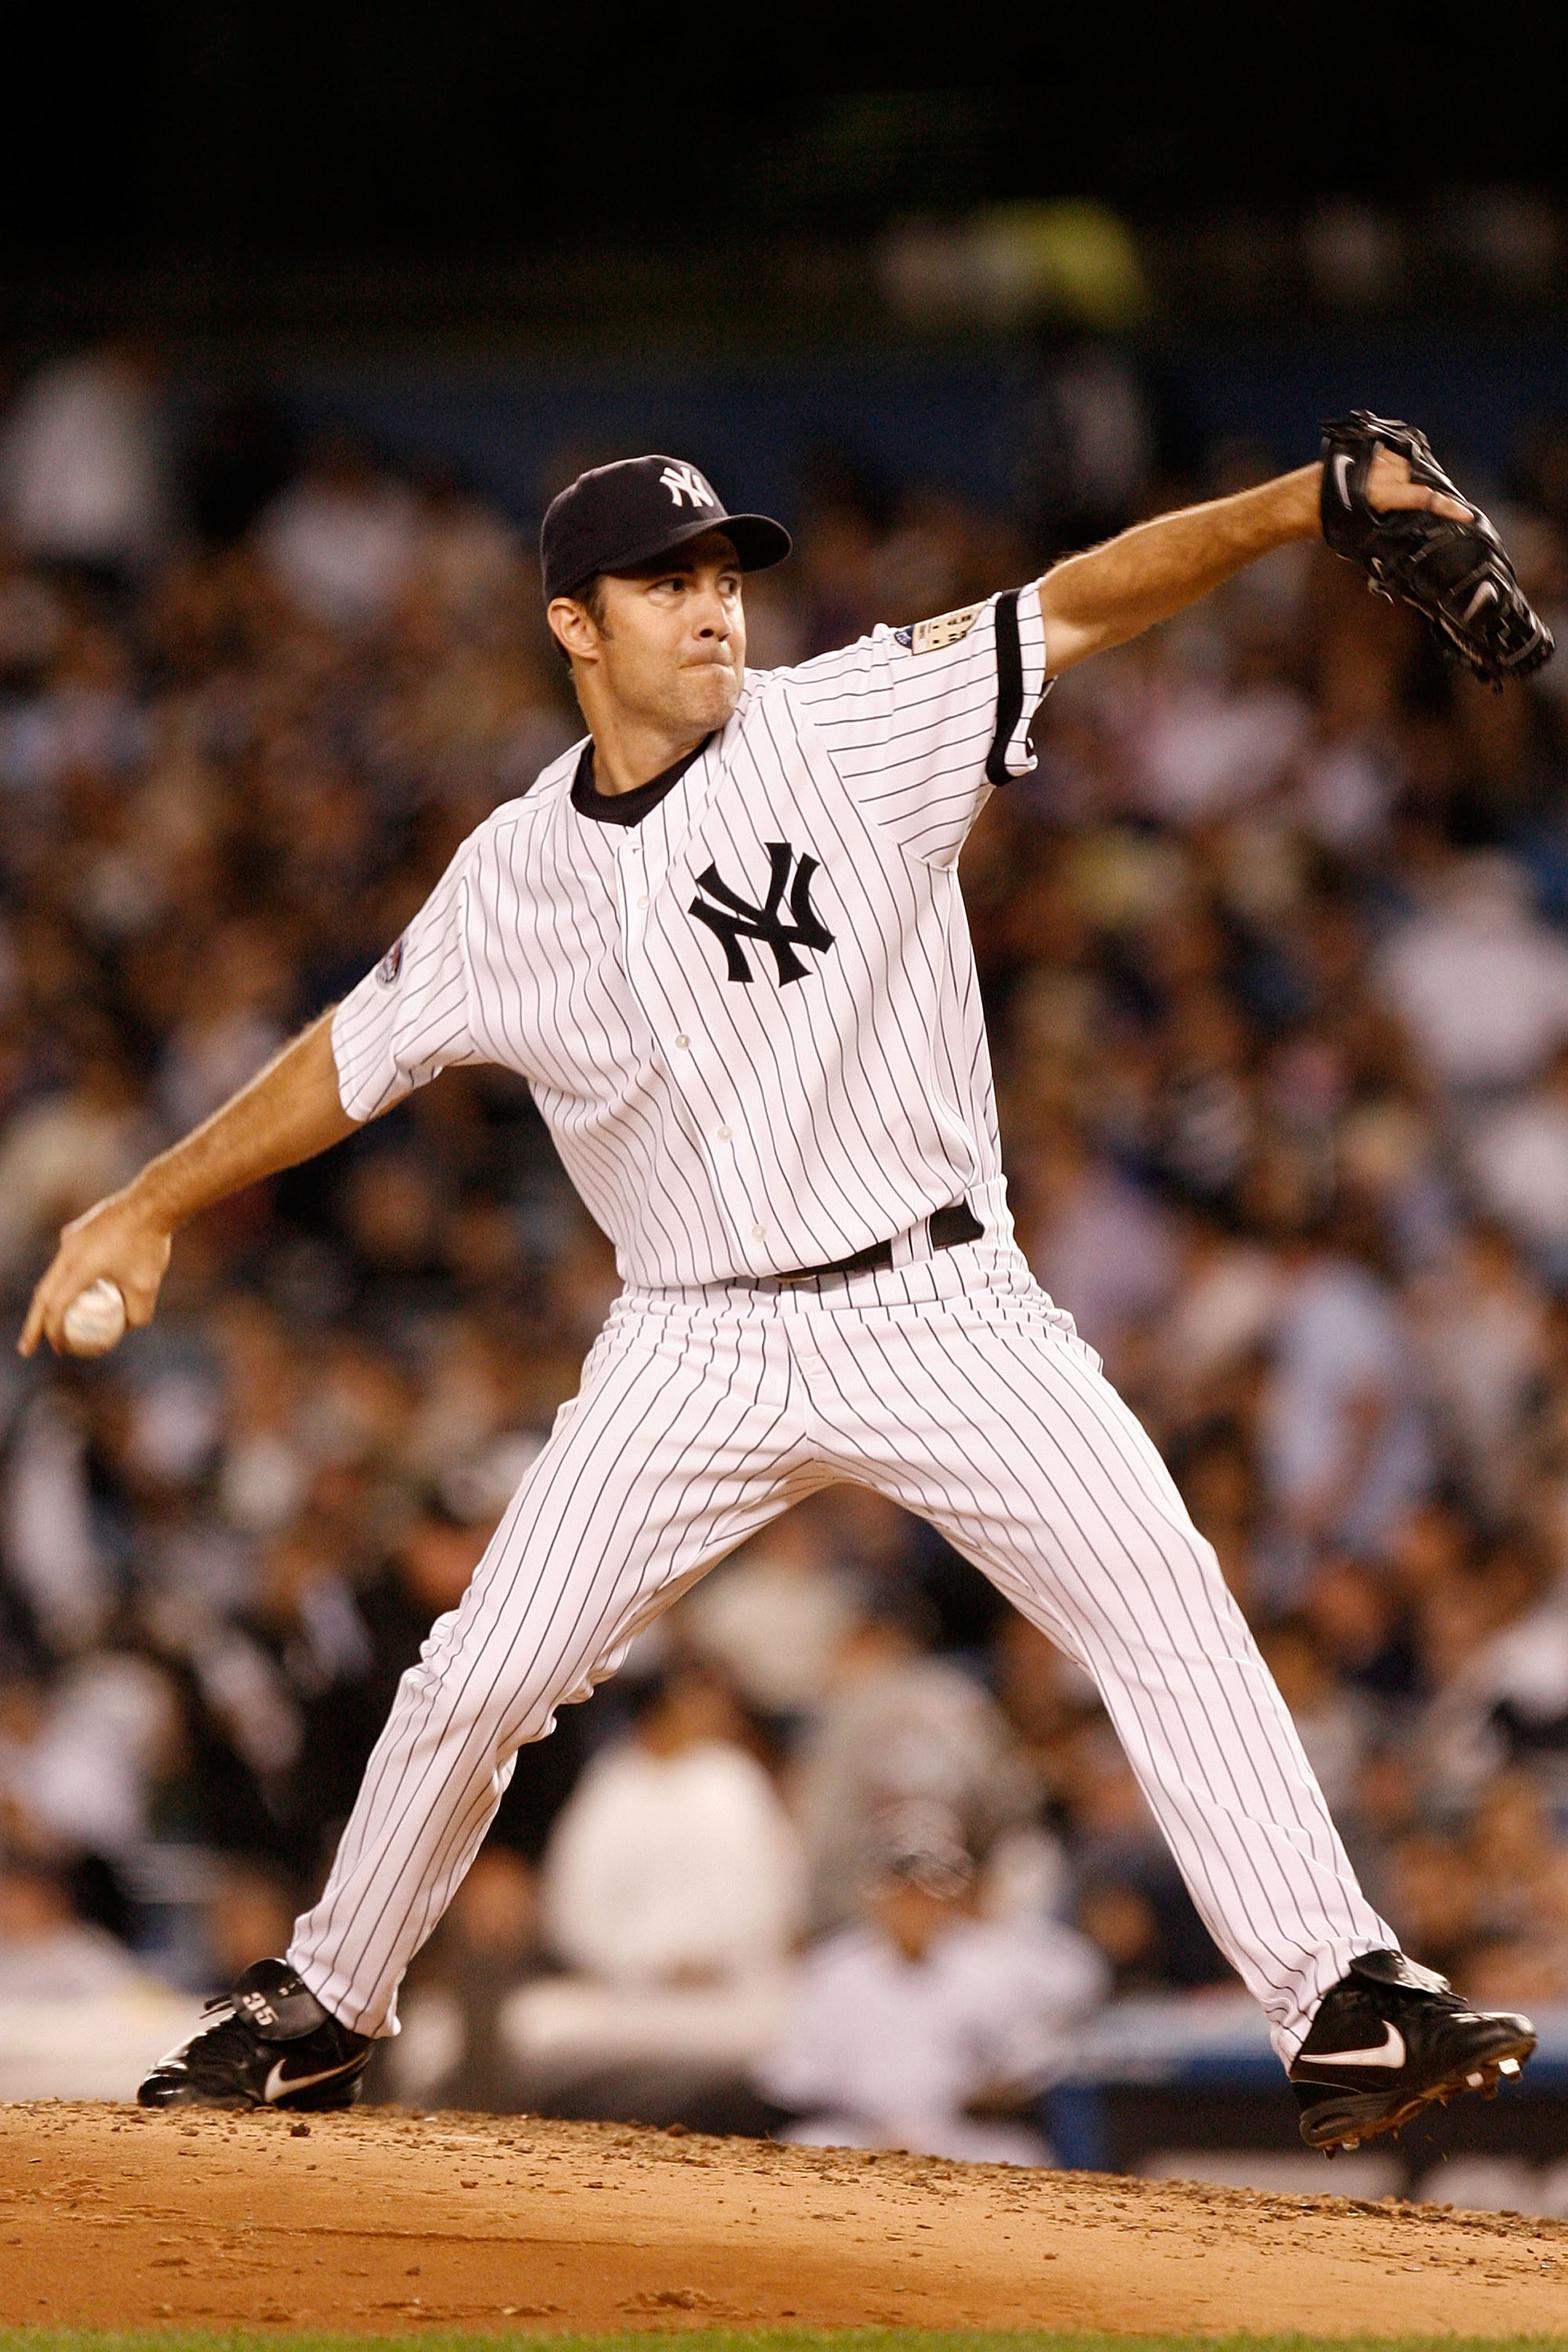 New York Yankees: A history of outstanding pitchers, find out the ten best